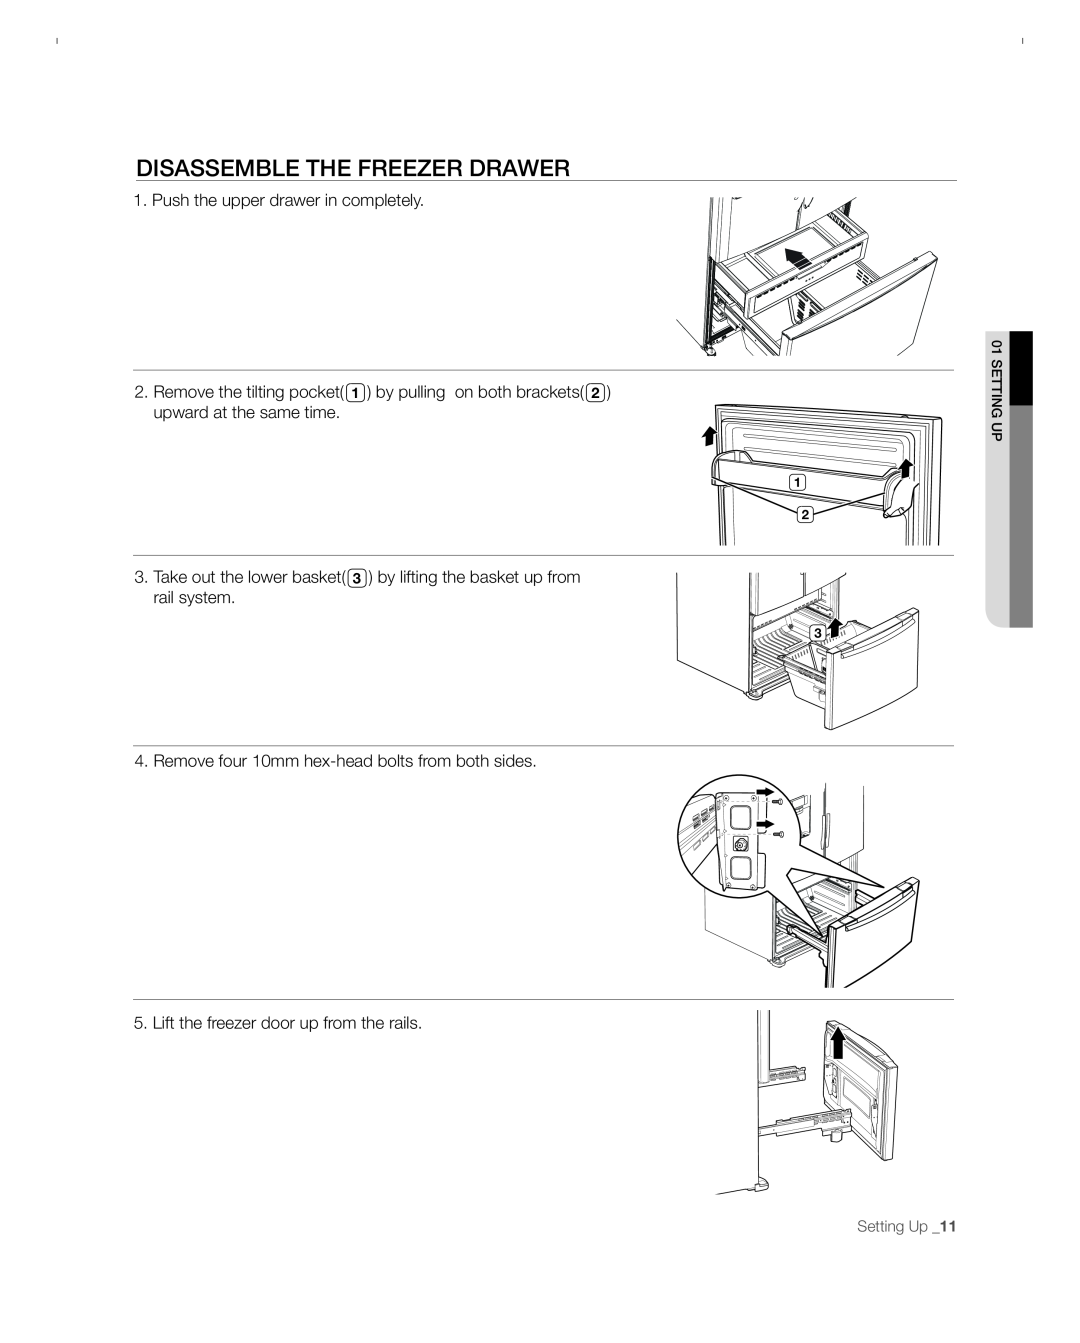 Samsung RFG297ACBP user manual disassemble the freezer drawer, Push the upper drawer in completely, Setting Up 